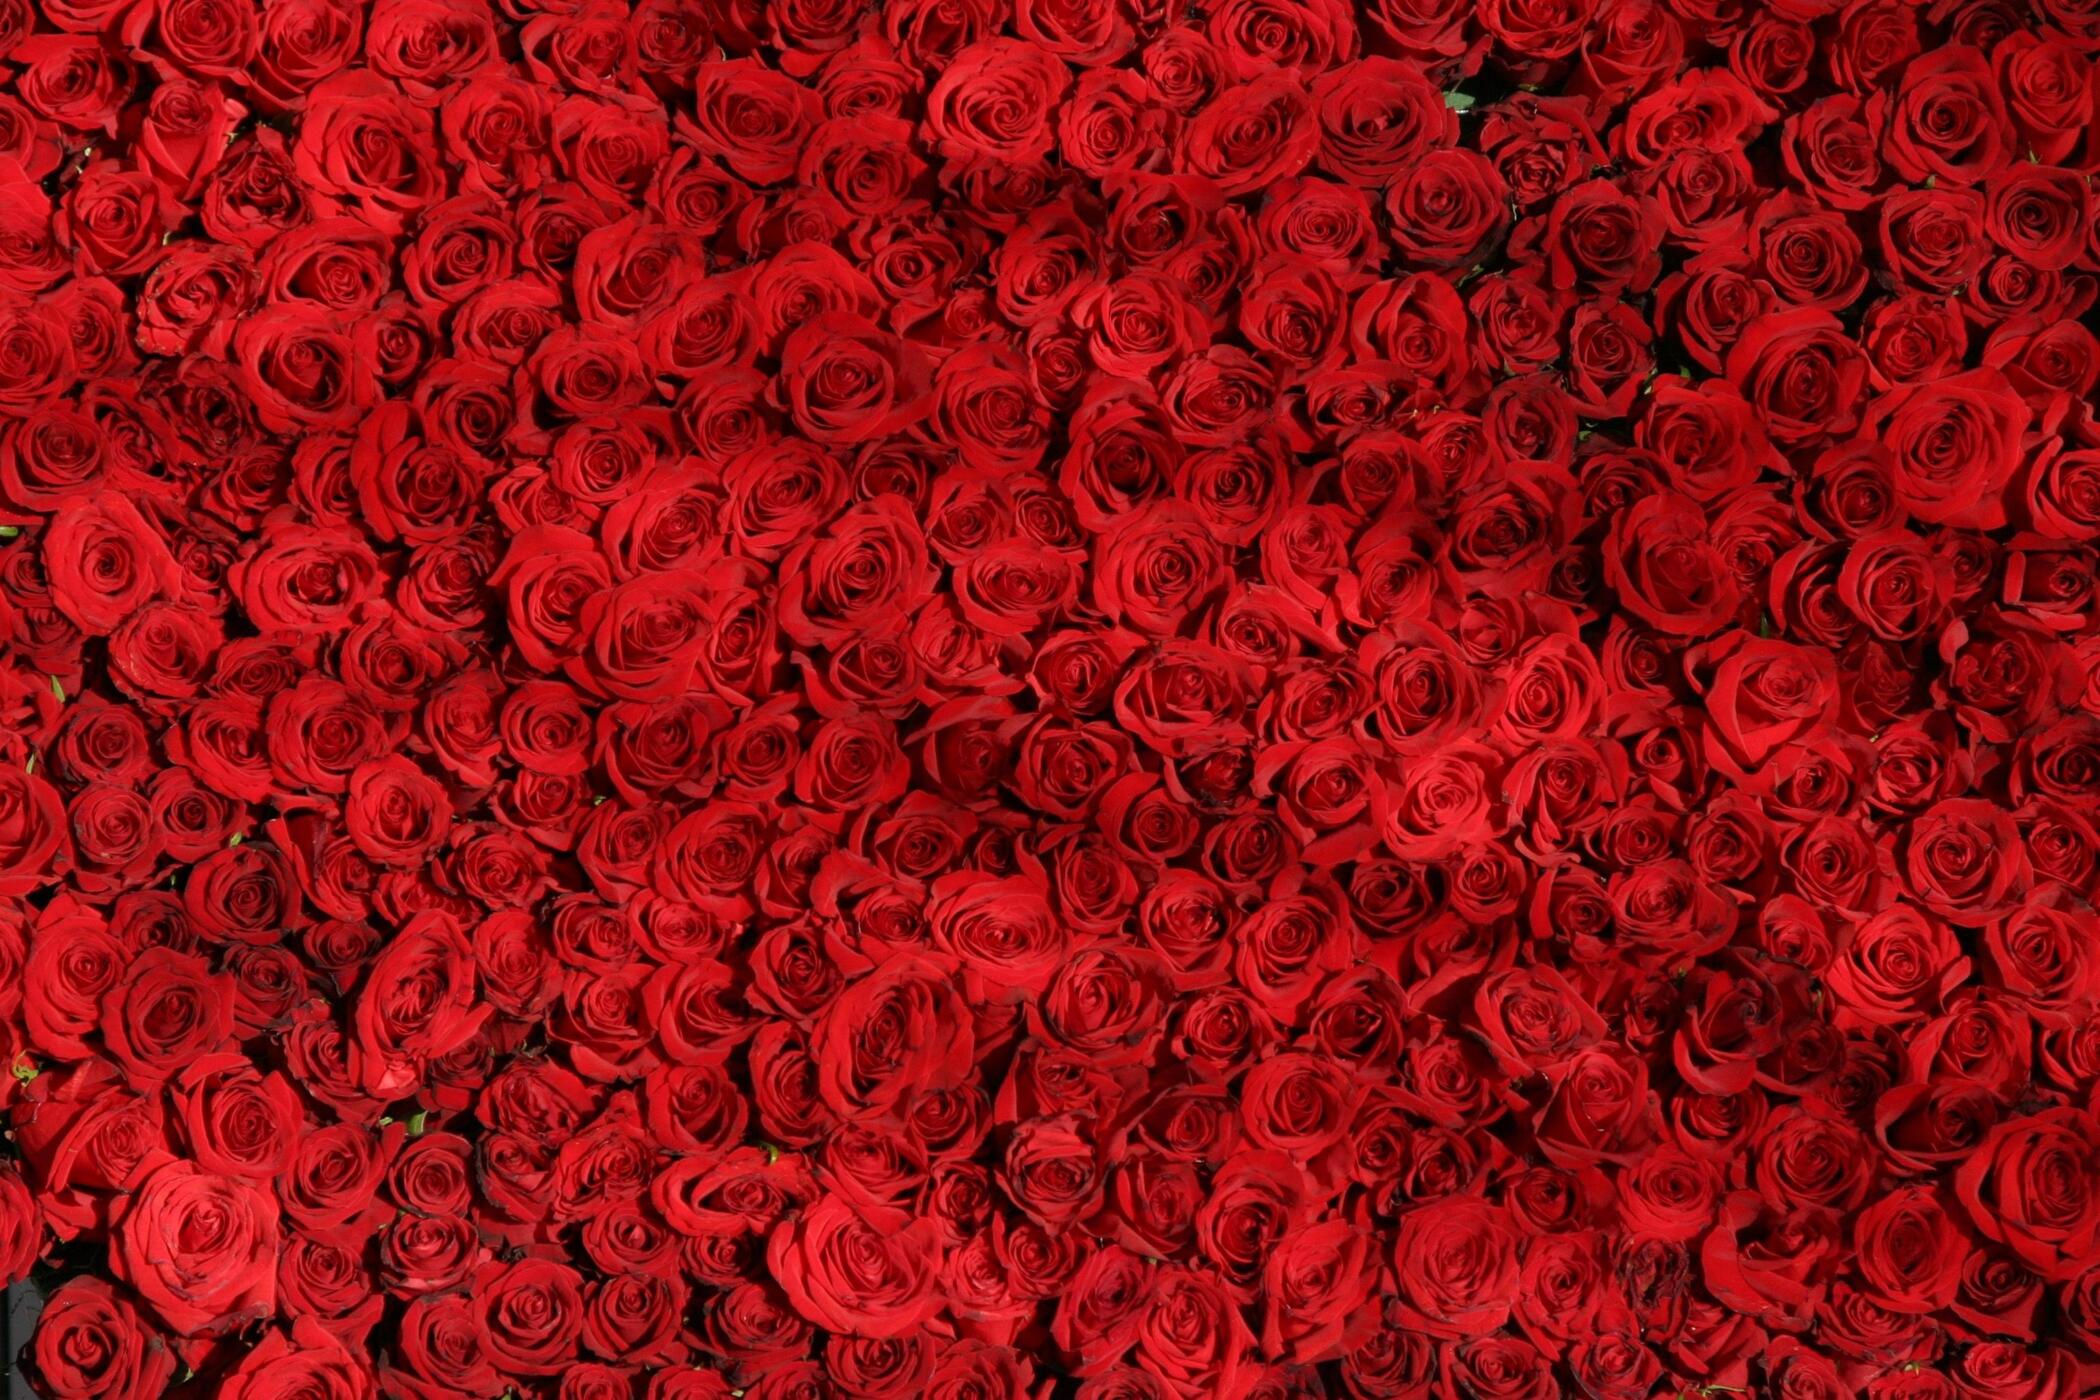 Red roses are love